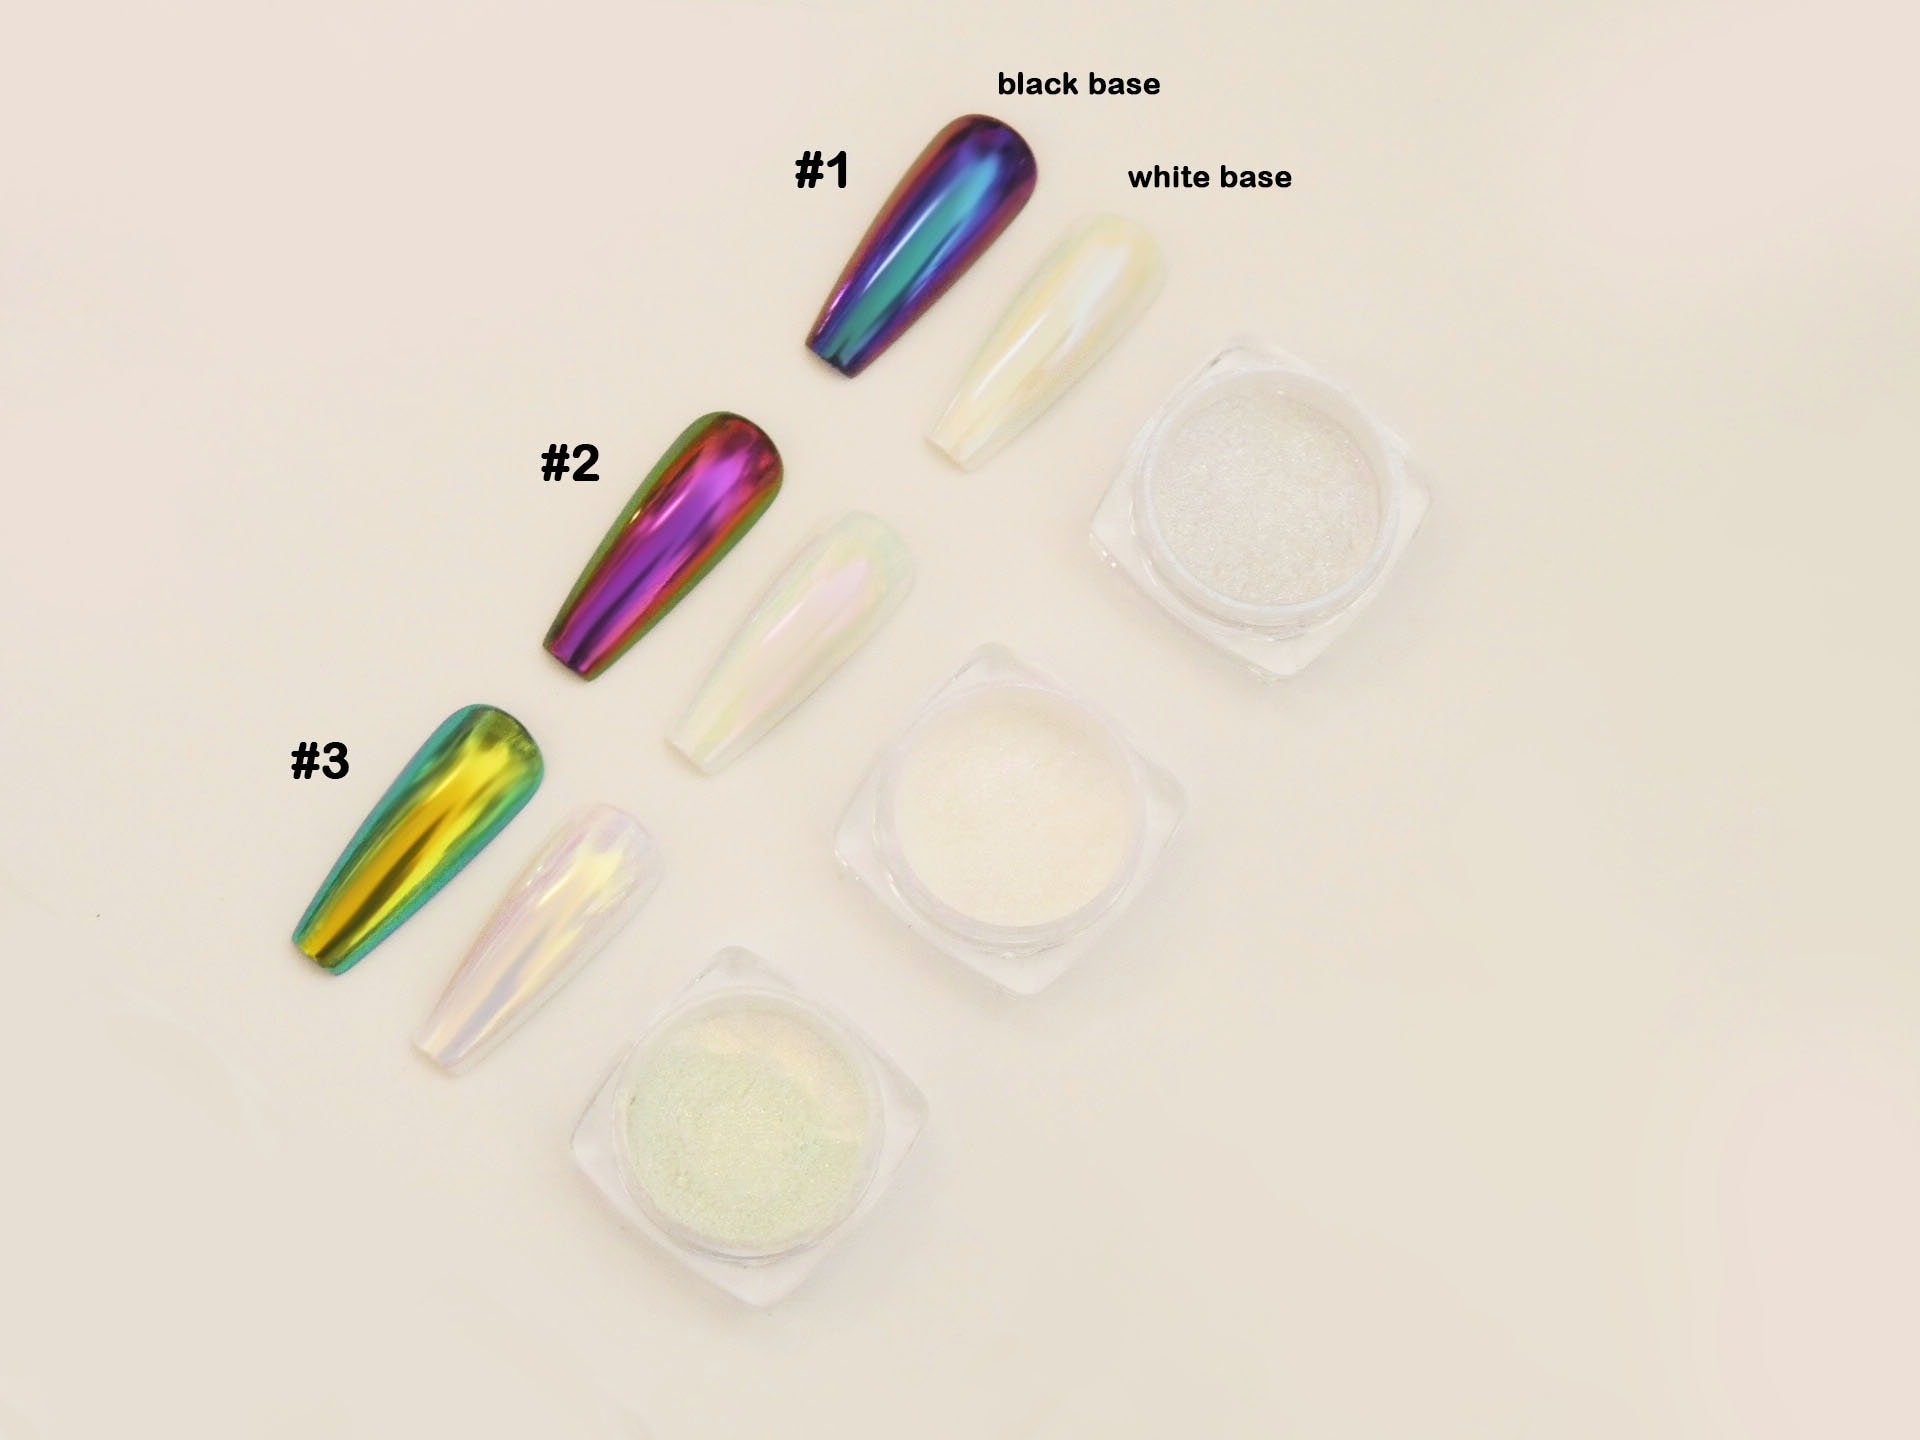 Chameleon Laser Shimmer Chrome Powder/ Ultra Fine Color Shift Pigment Glitter for Nails/ Shiny Glossy Mirrored Effect Nails Supply